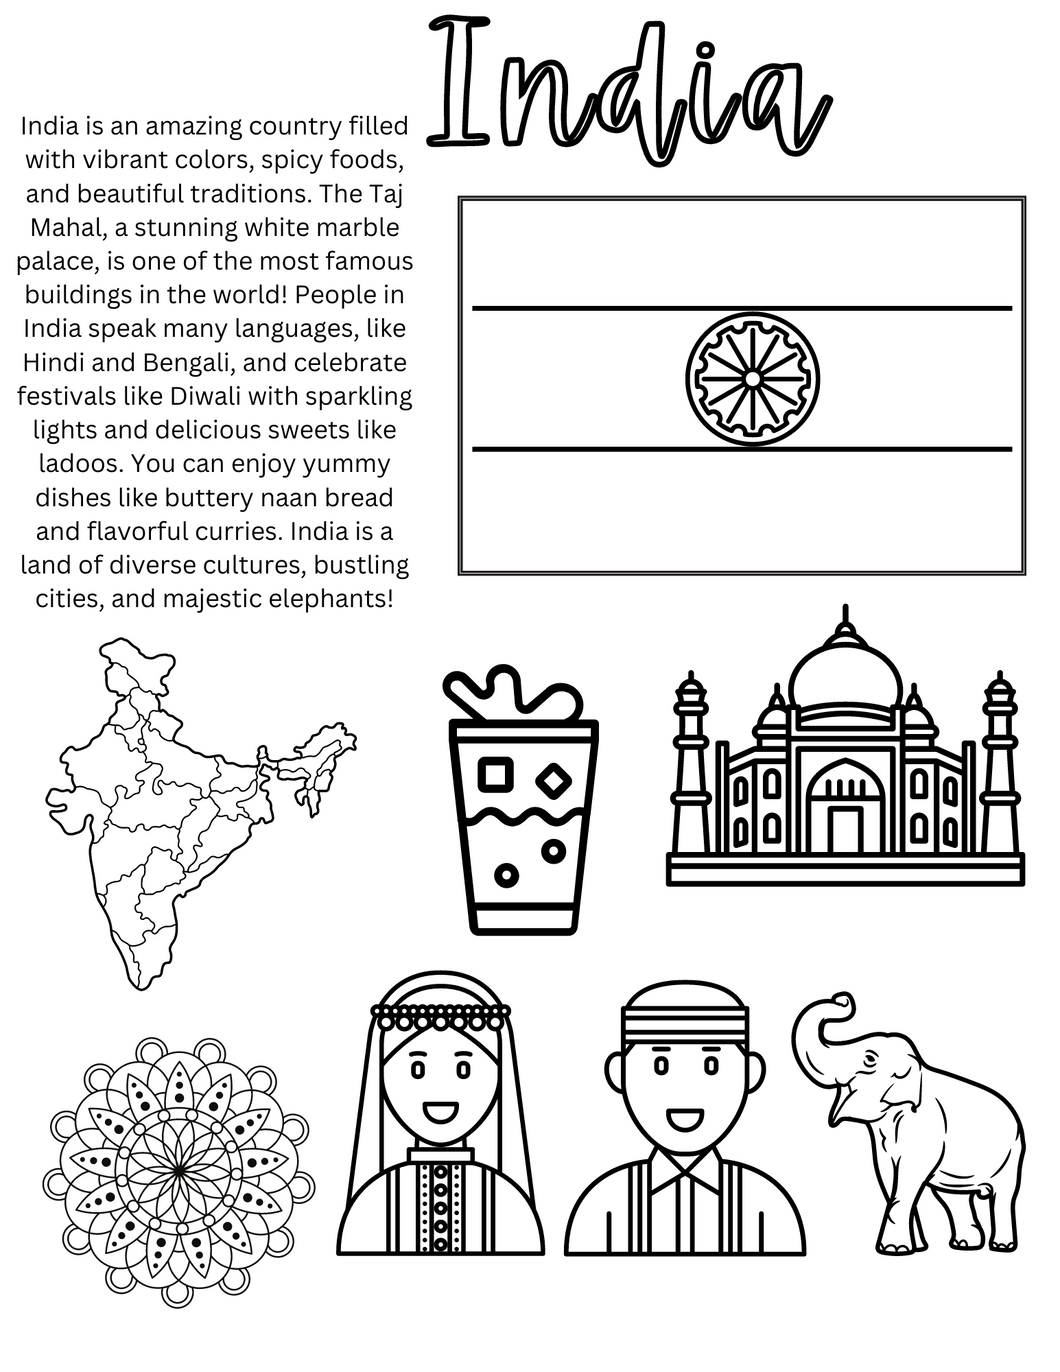 And Away We Go Travel Coloring Book